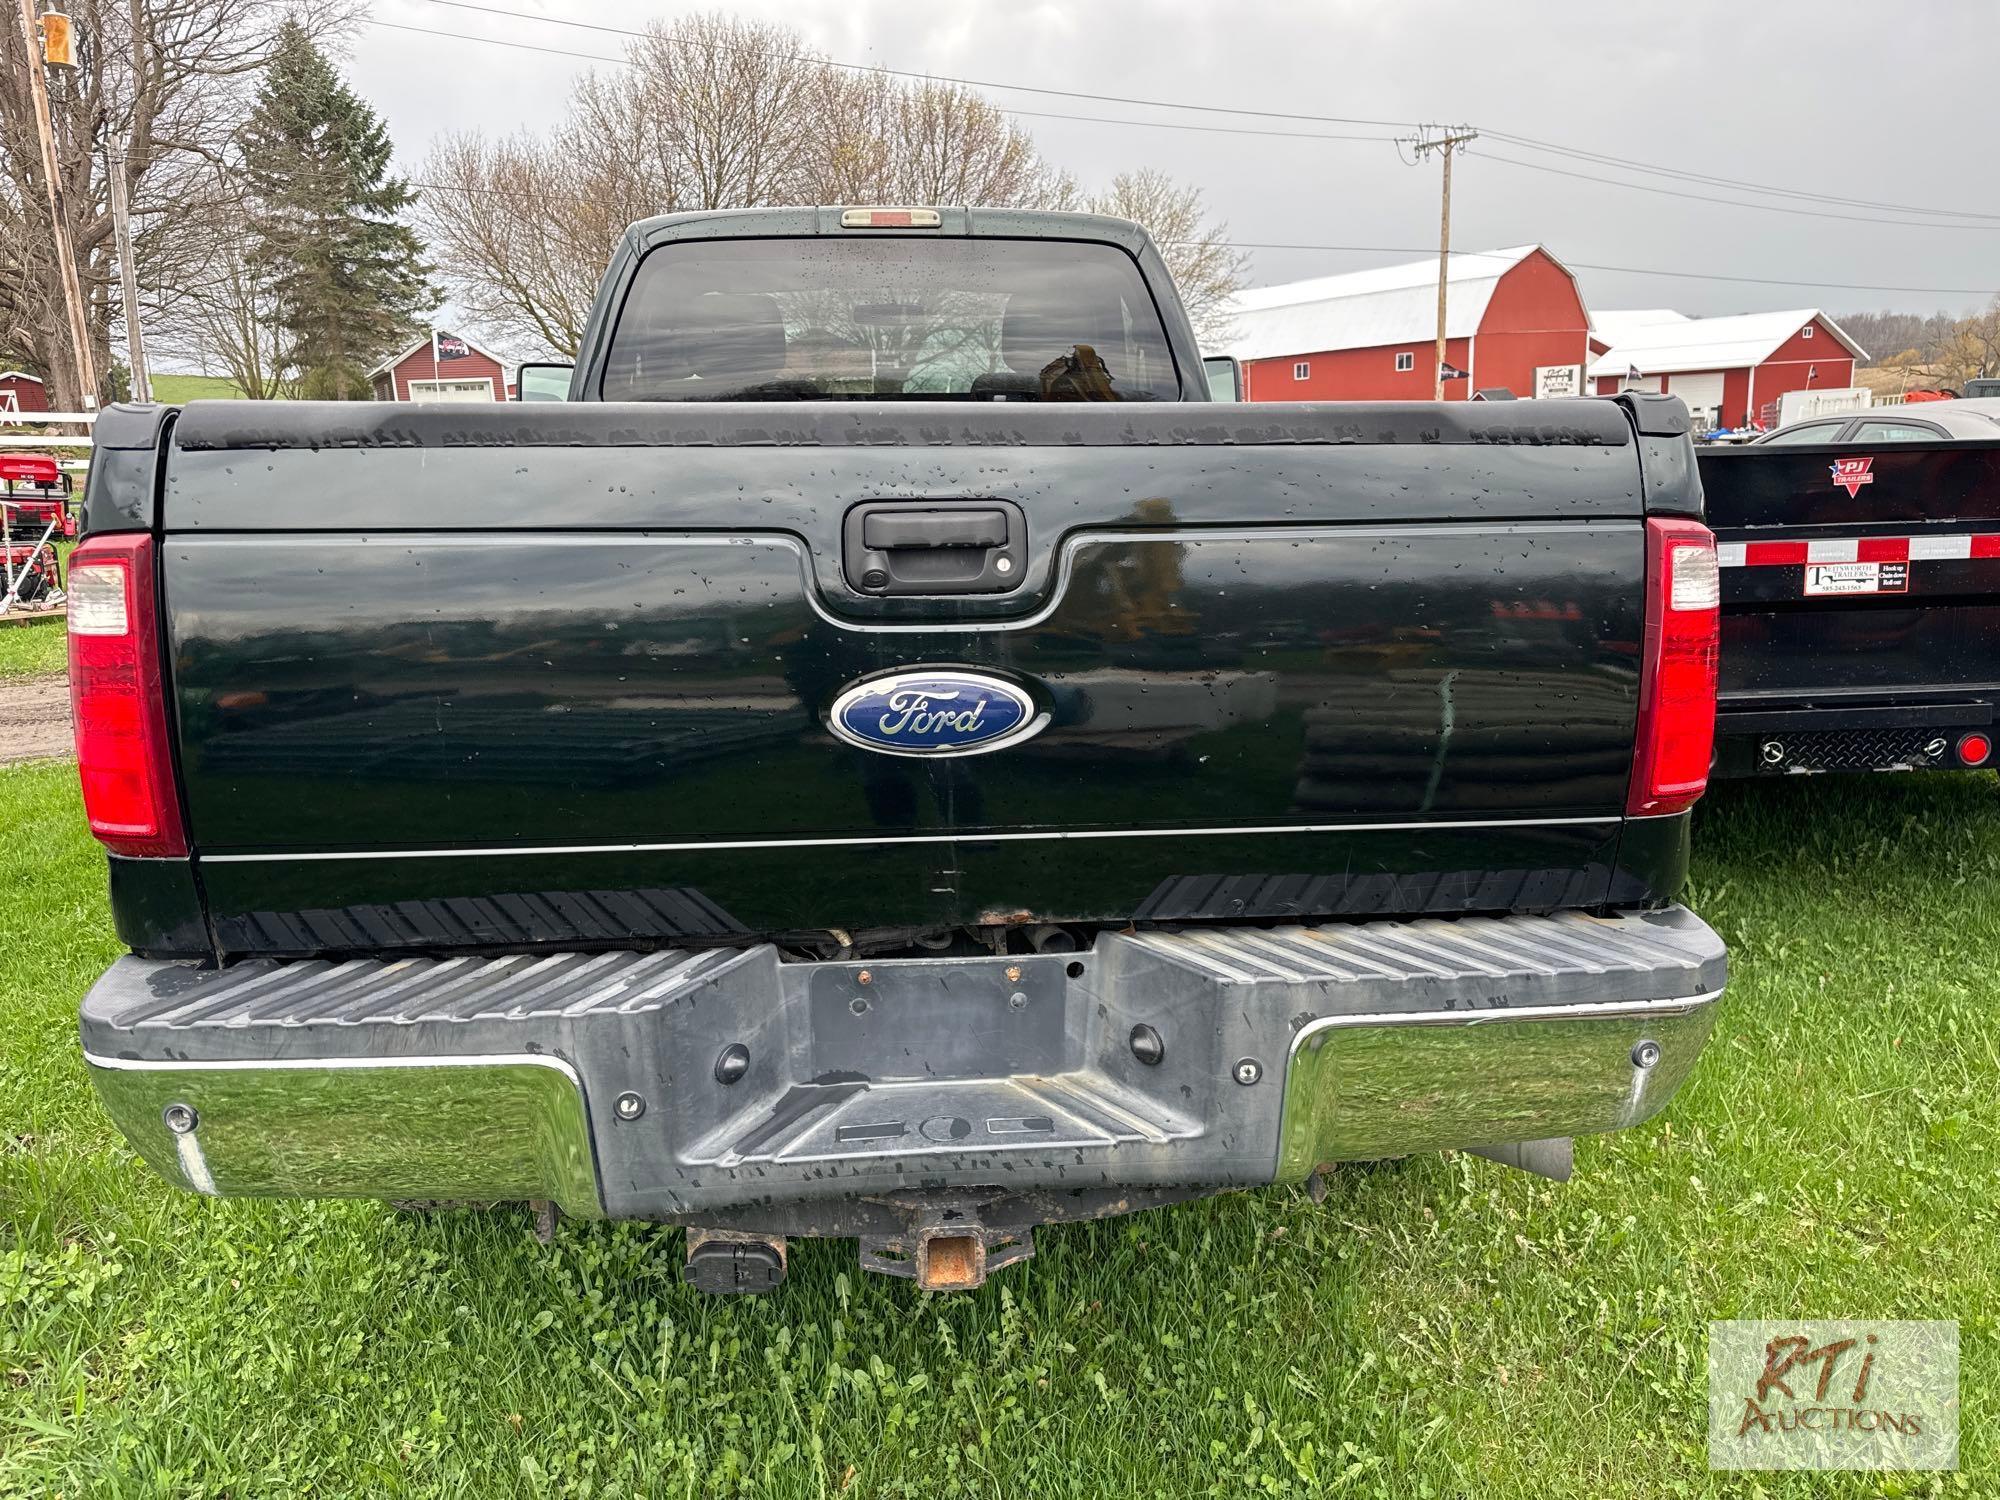 2012 Ford F-250 XLT regular cab pickup, 4WD, 8ft box, PW, PL, A/C, cruise, power seat, 262K,